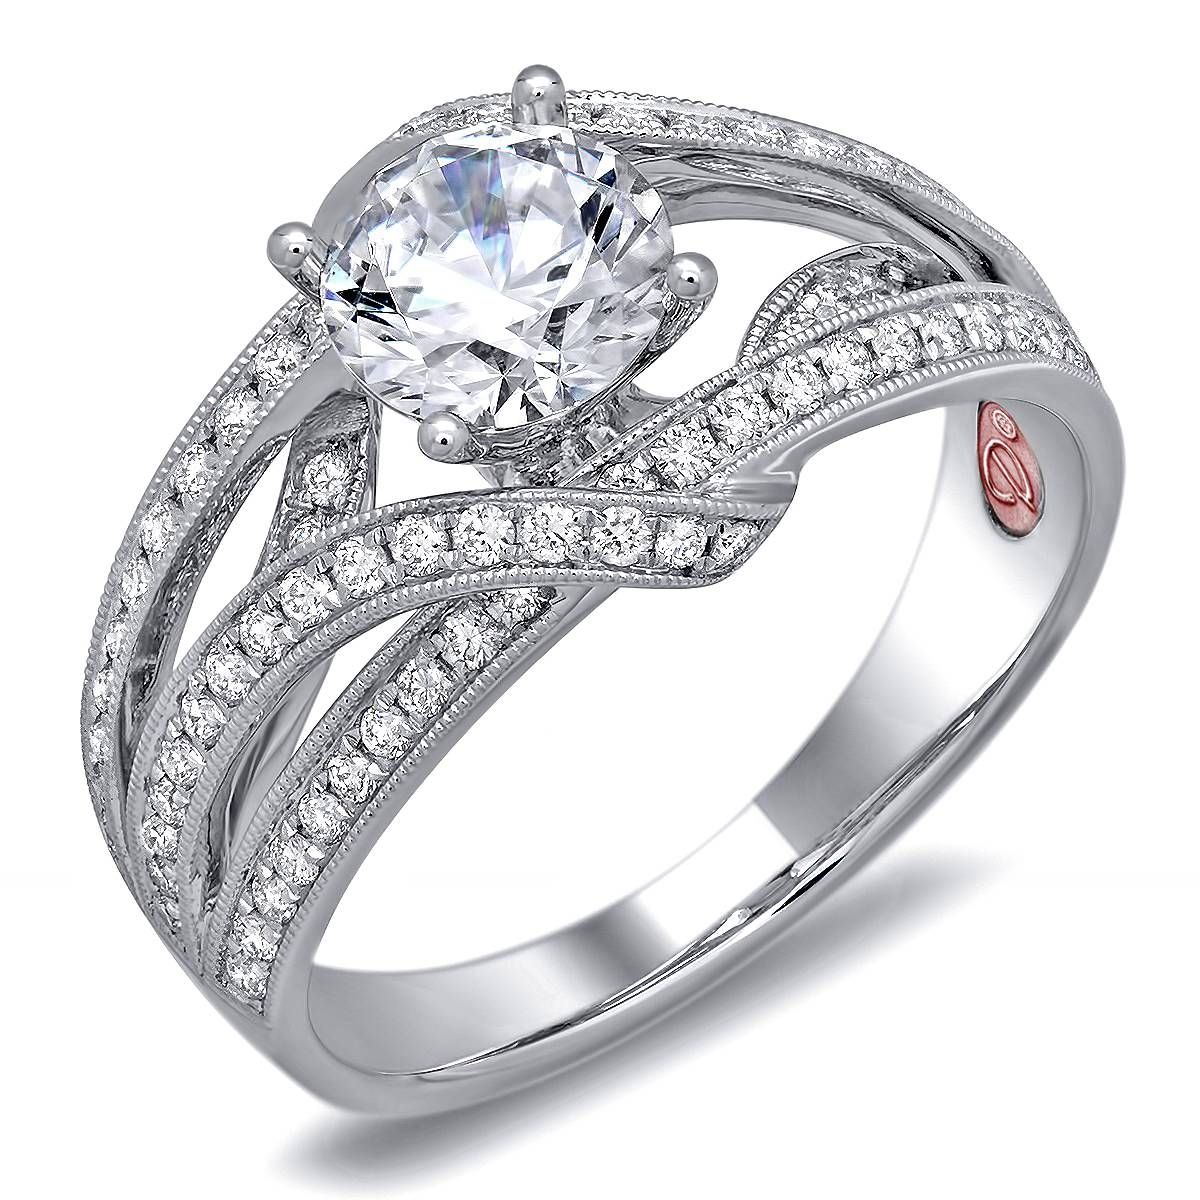 Diamond | Demarco Bridal Jewelry Official Blog | Page 2 Intended For Designing An Engagement Rings (View 5 of 15)